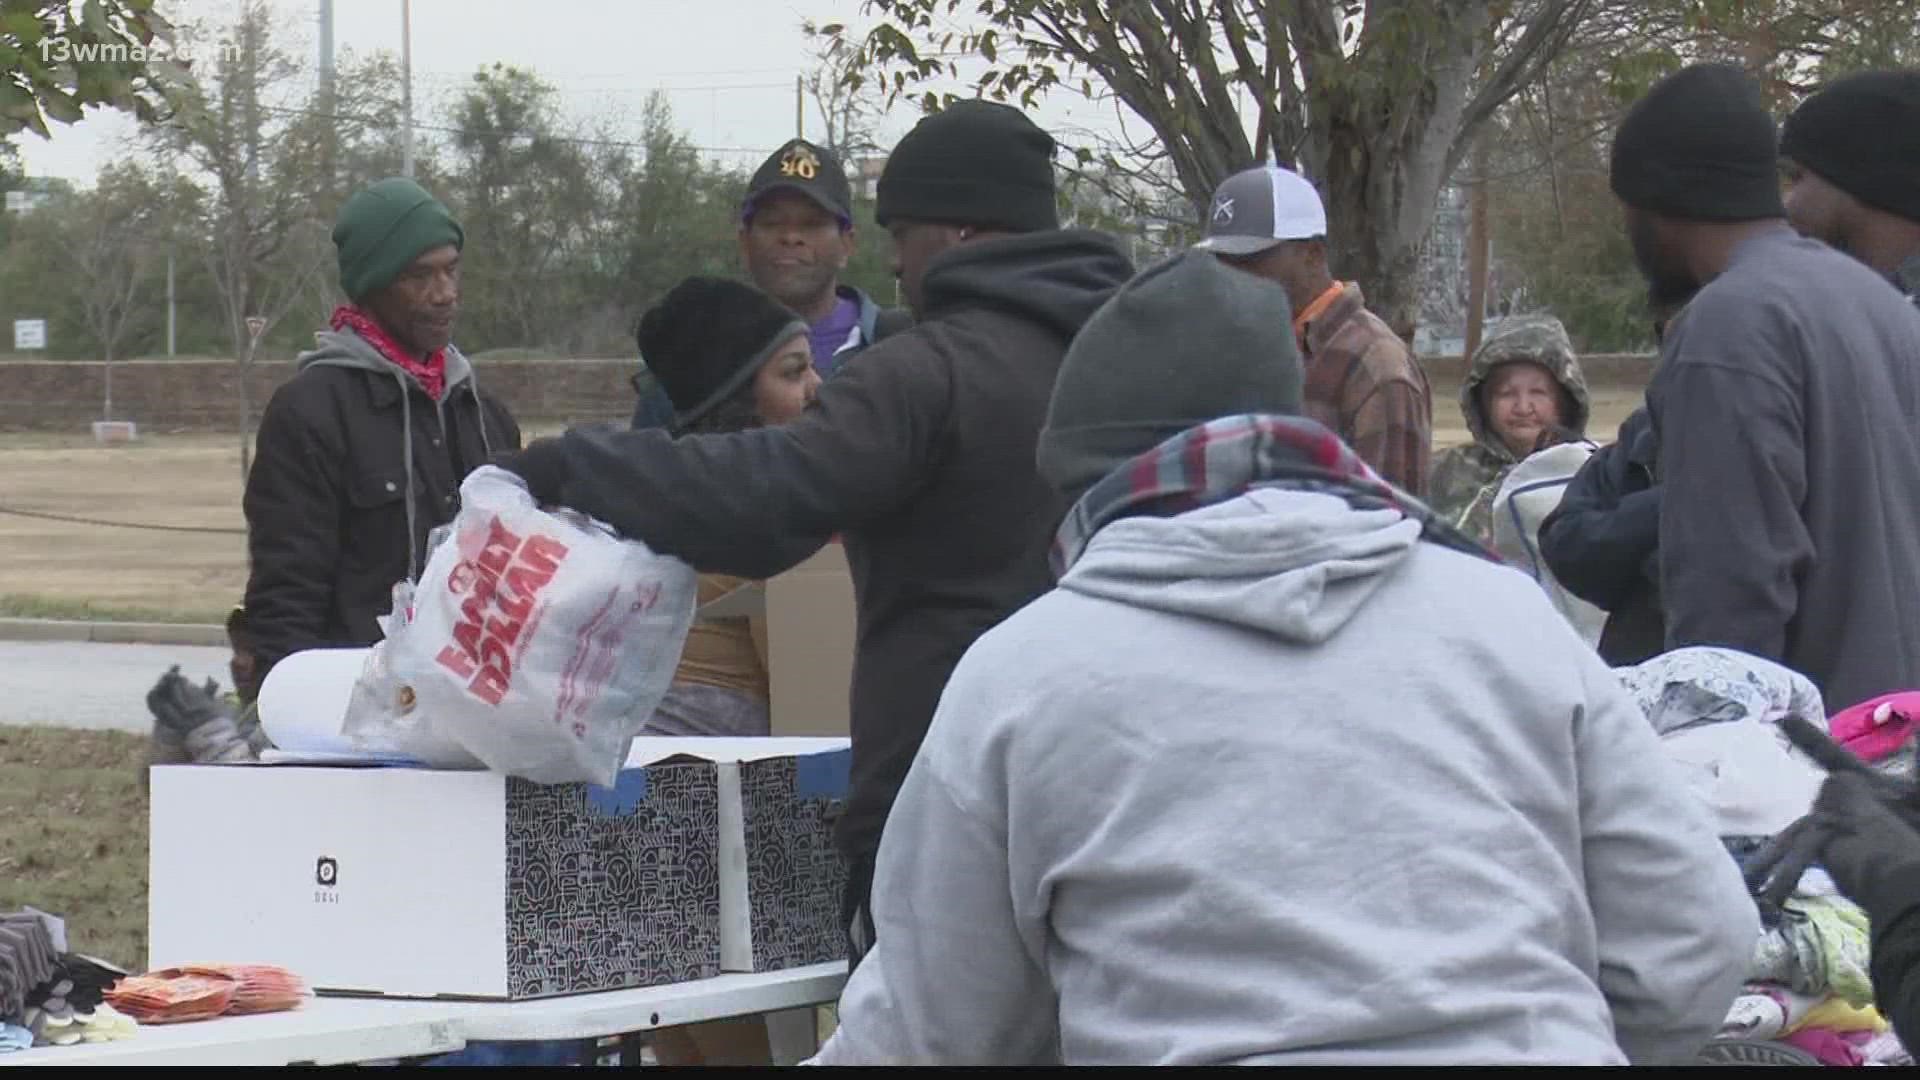 Angela's Anointed Angels partnered with the free masons to give away clothes, blankets and more to those in need